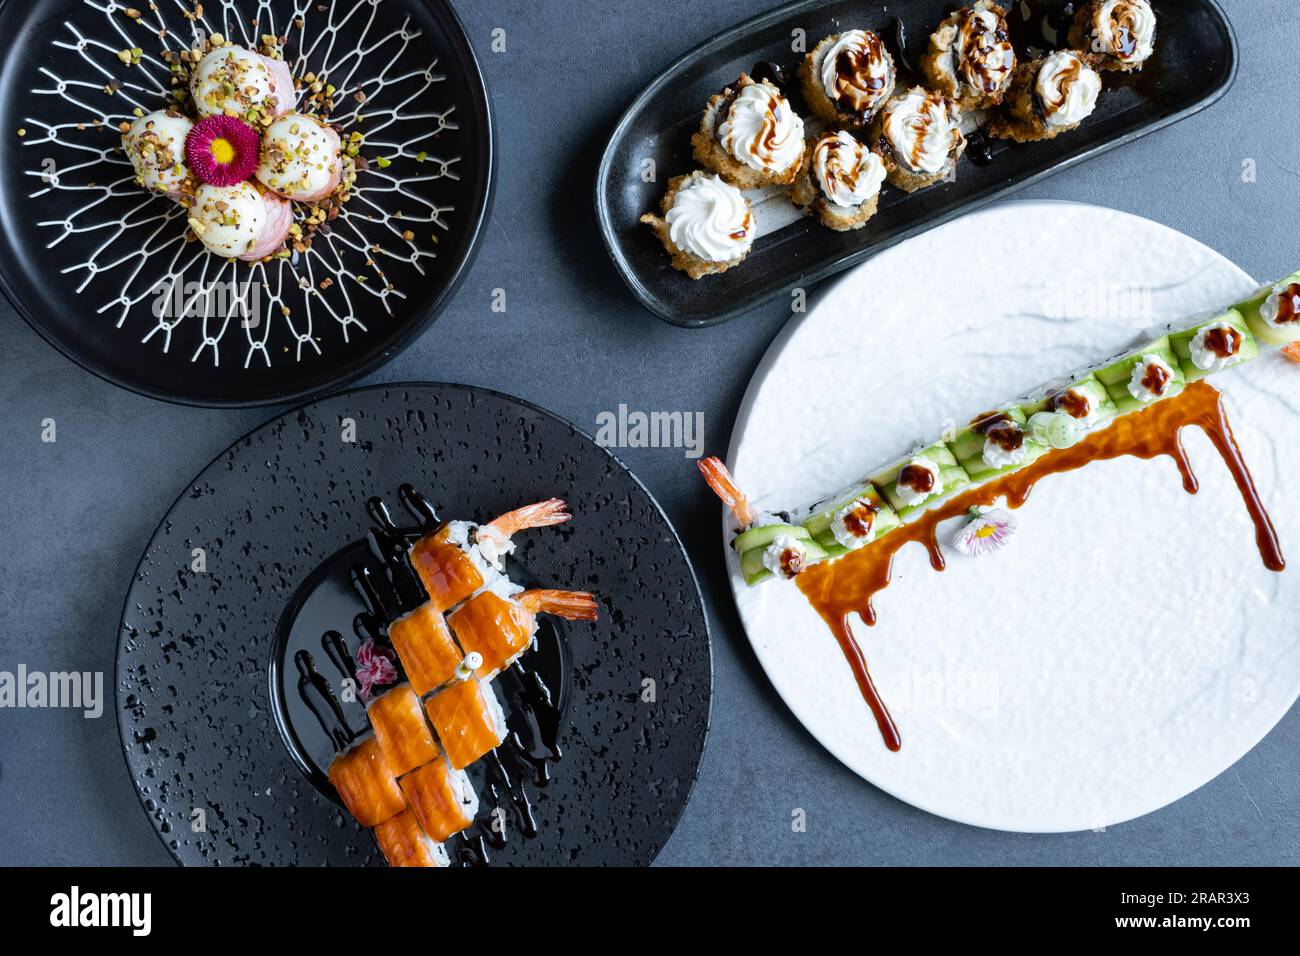 Sushi restaurant, top view of a mix of Japanese dishes. Stock Photo